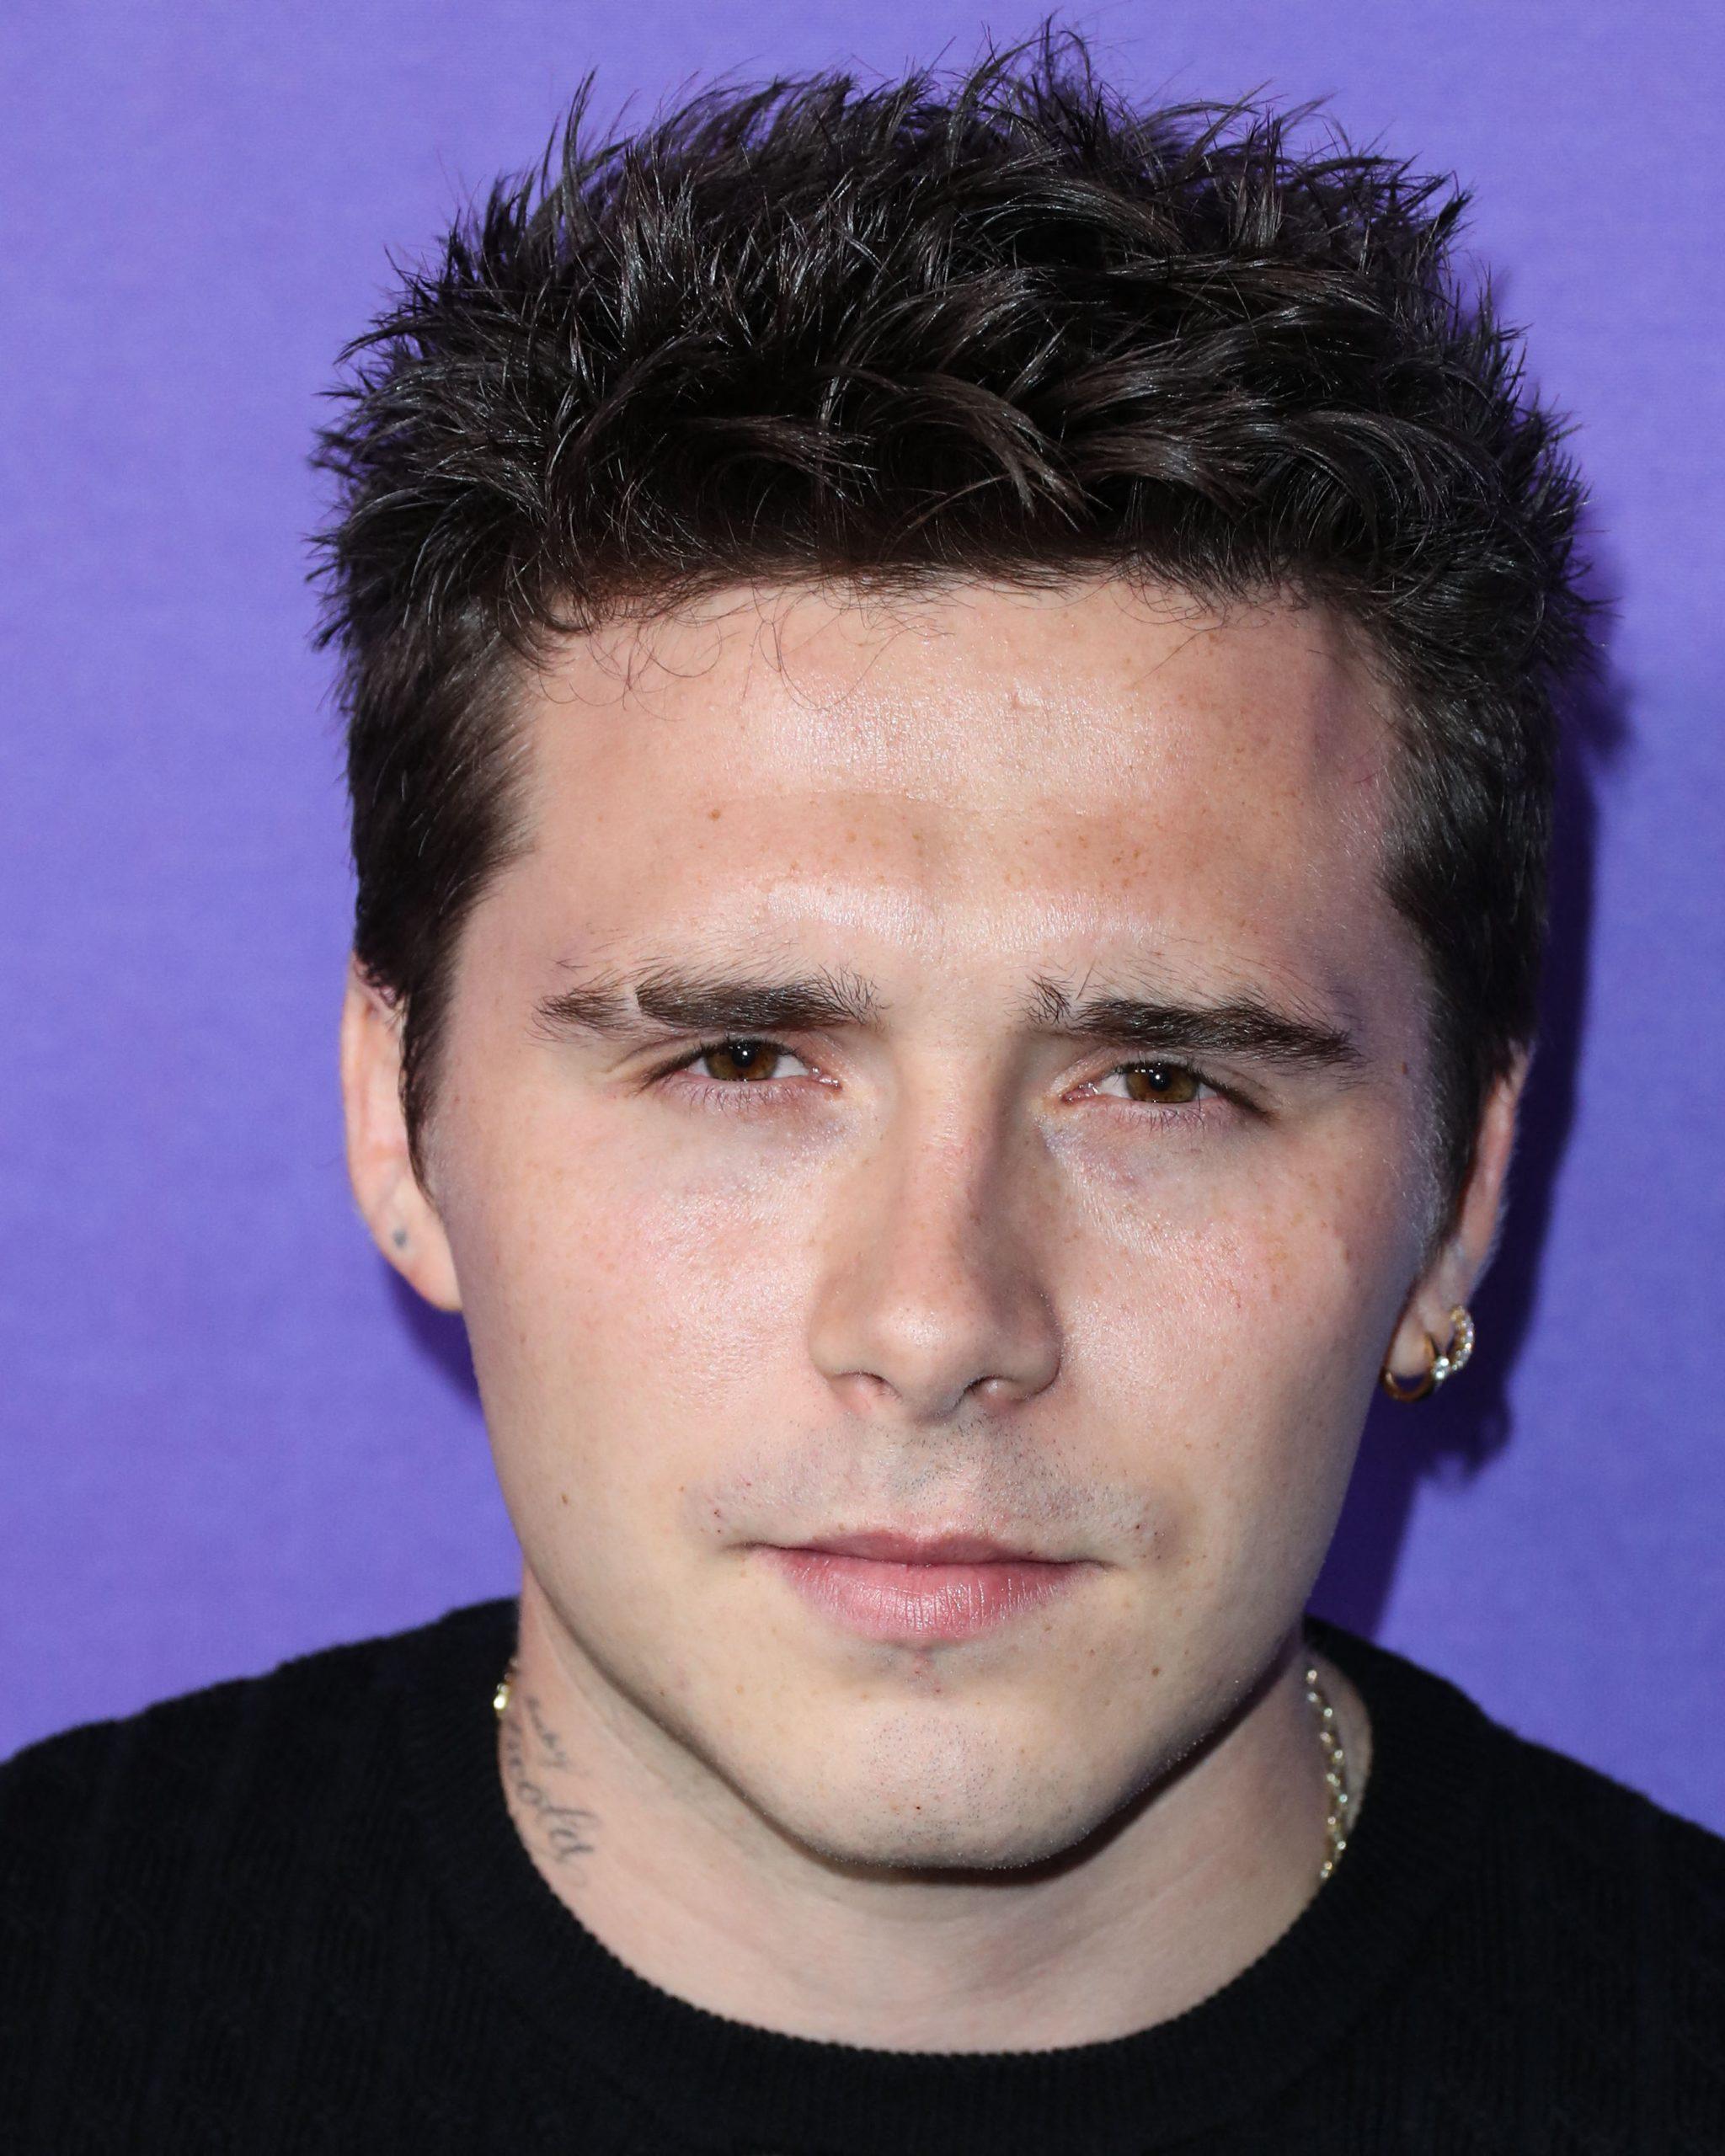 Brooklyn Beckham at the Variety 2022 Power Of Young Hollywood Celebration